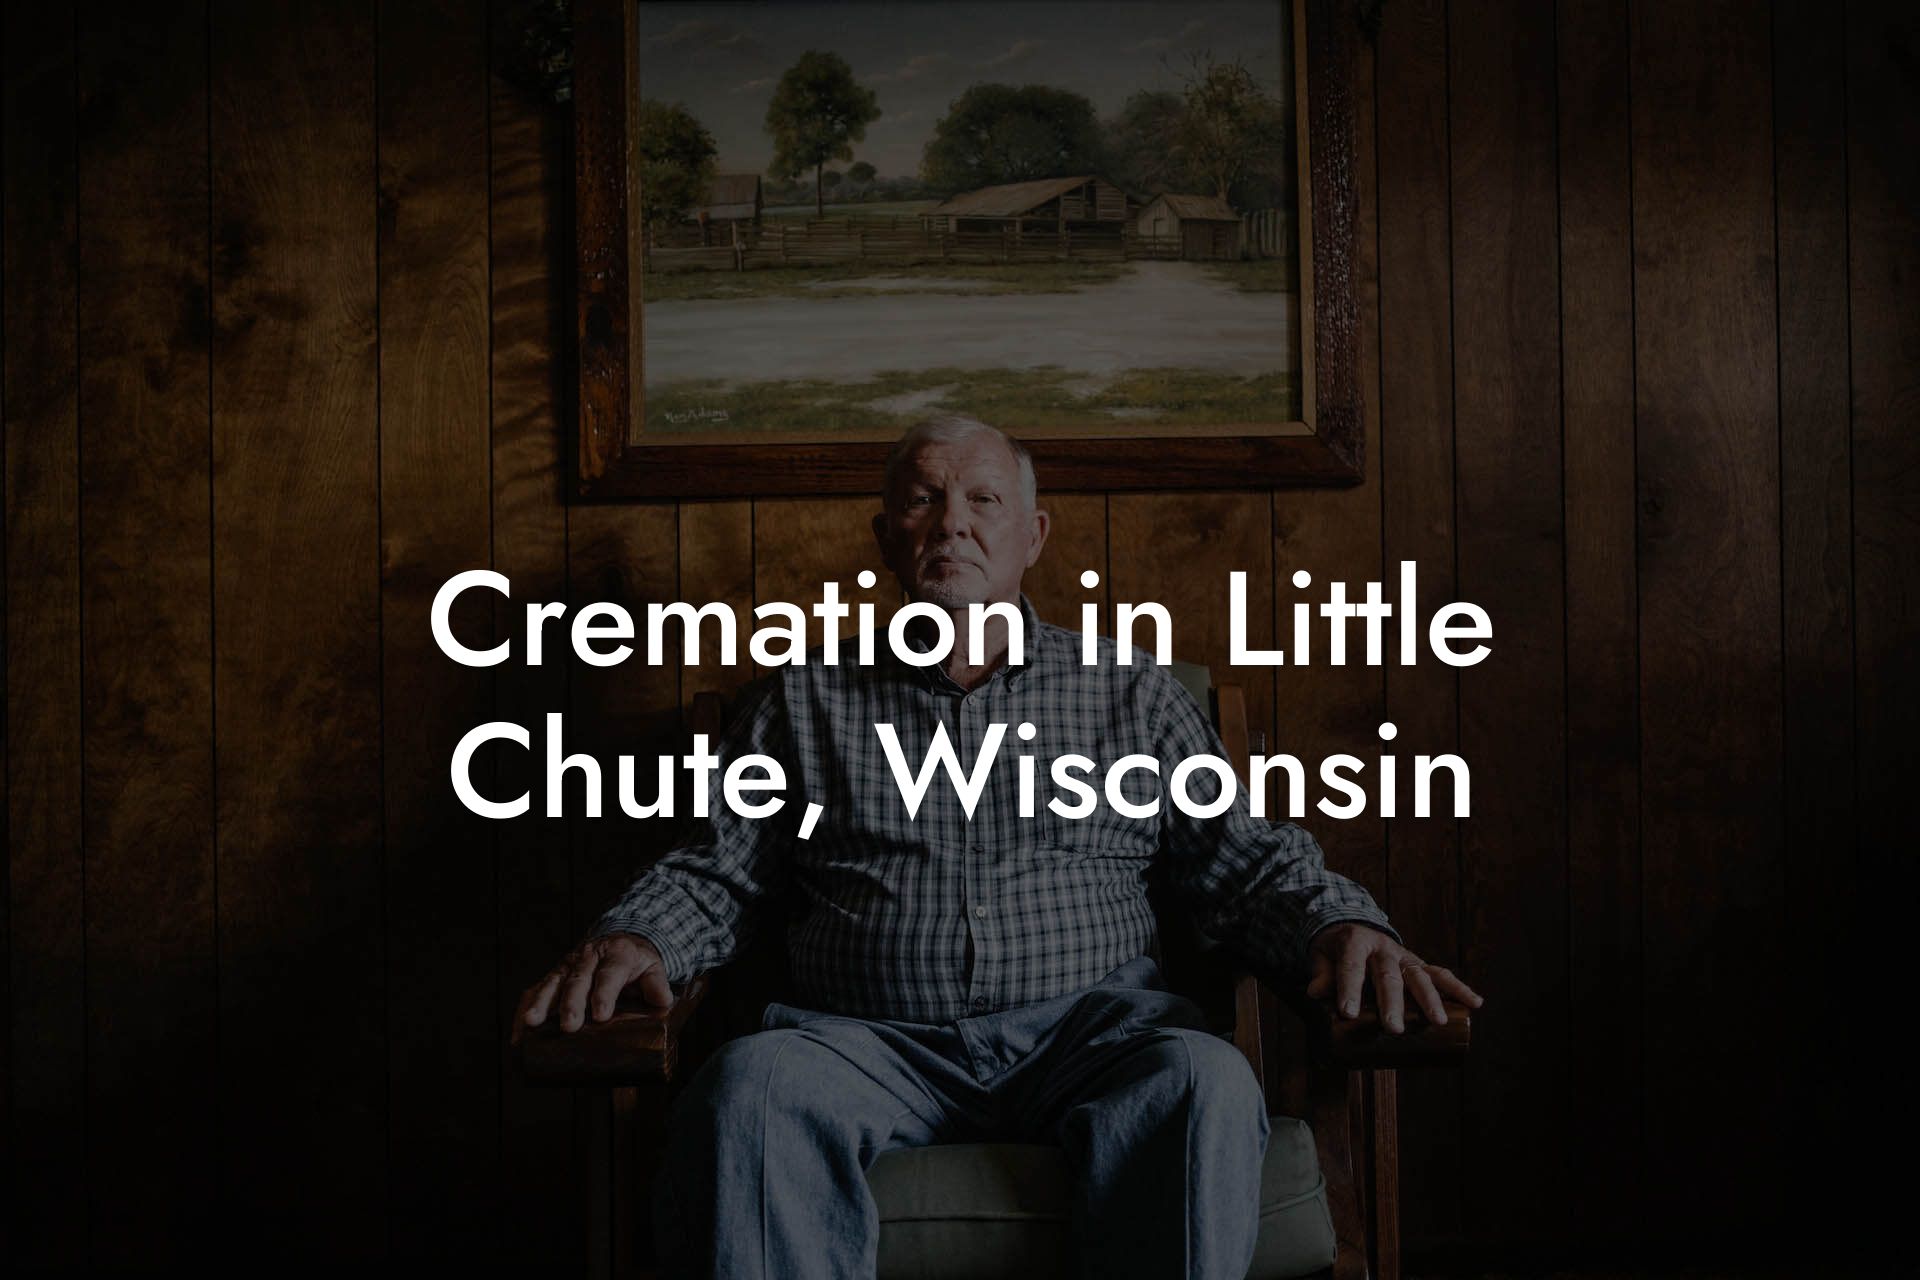 Cremation in Little Chute, Wisconsin